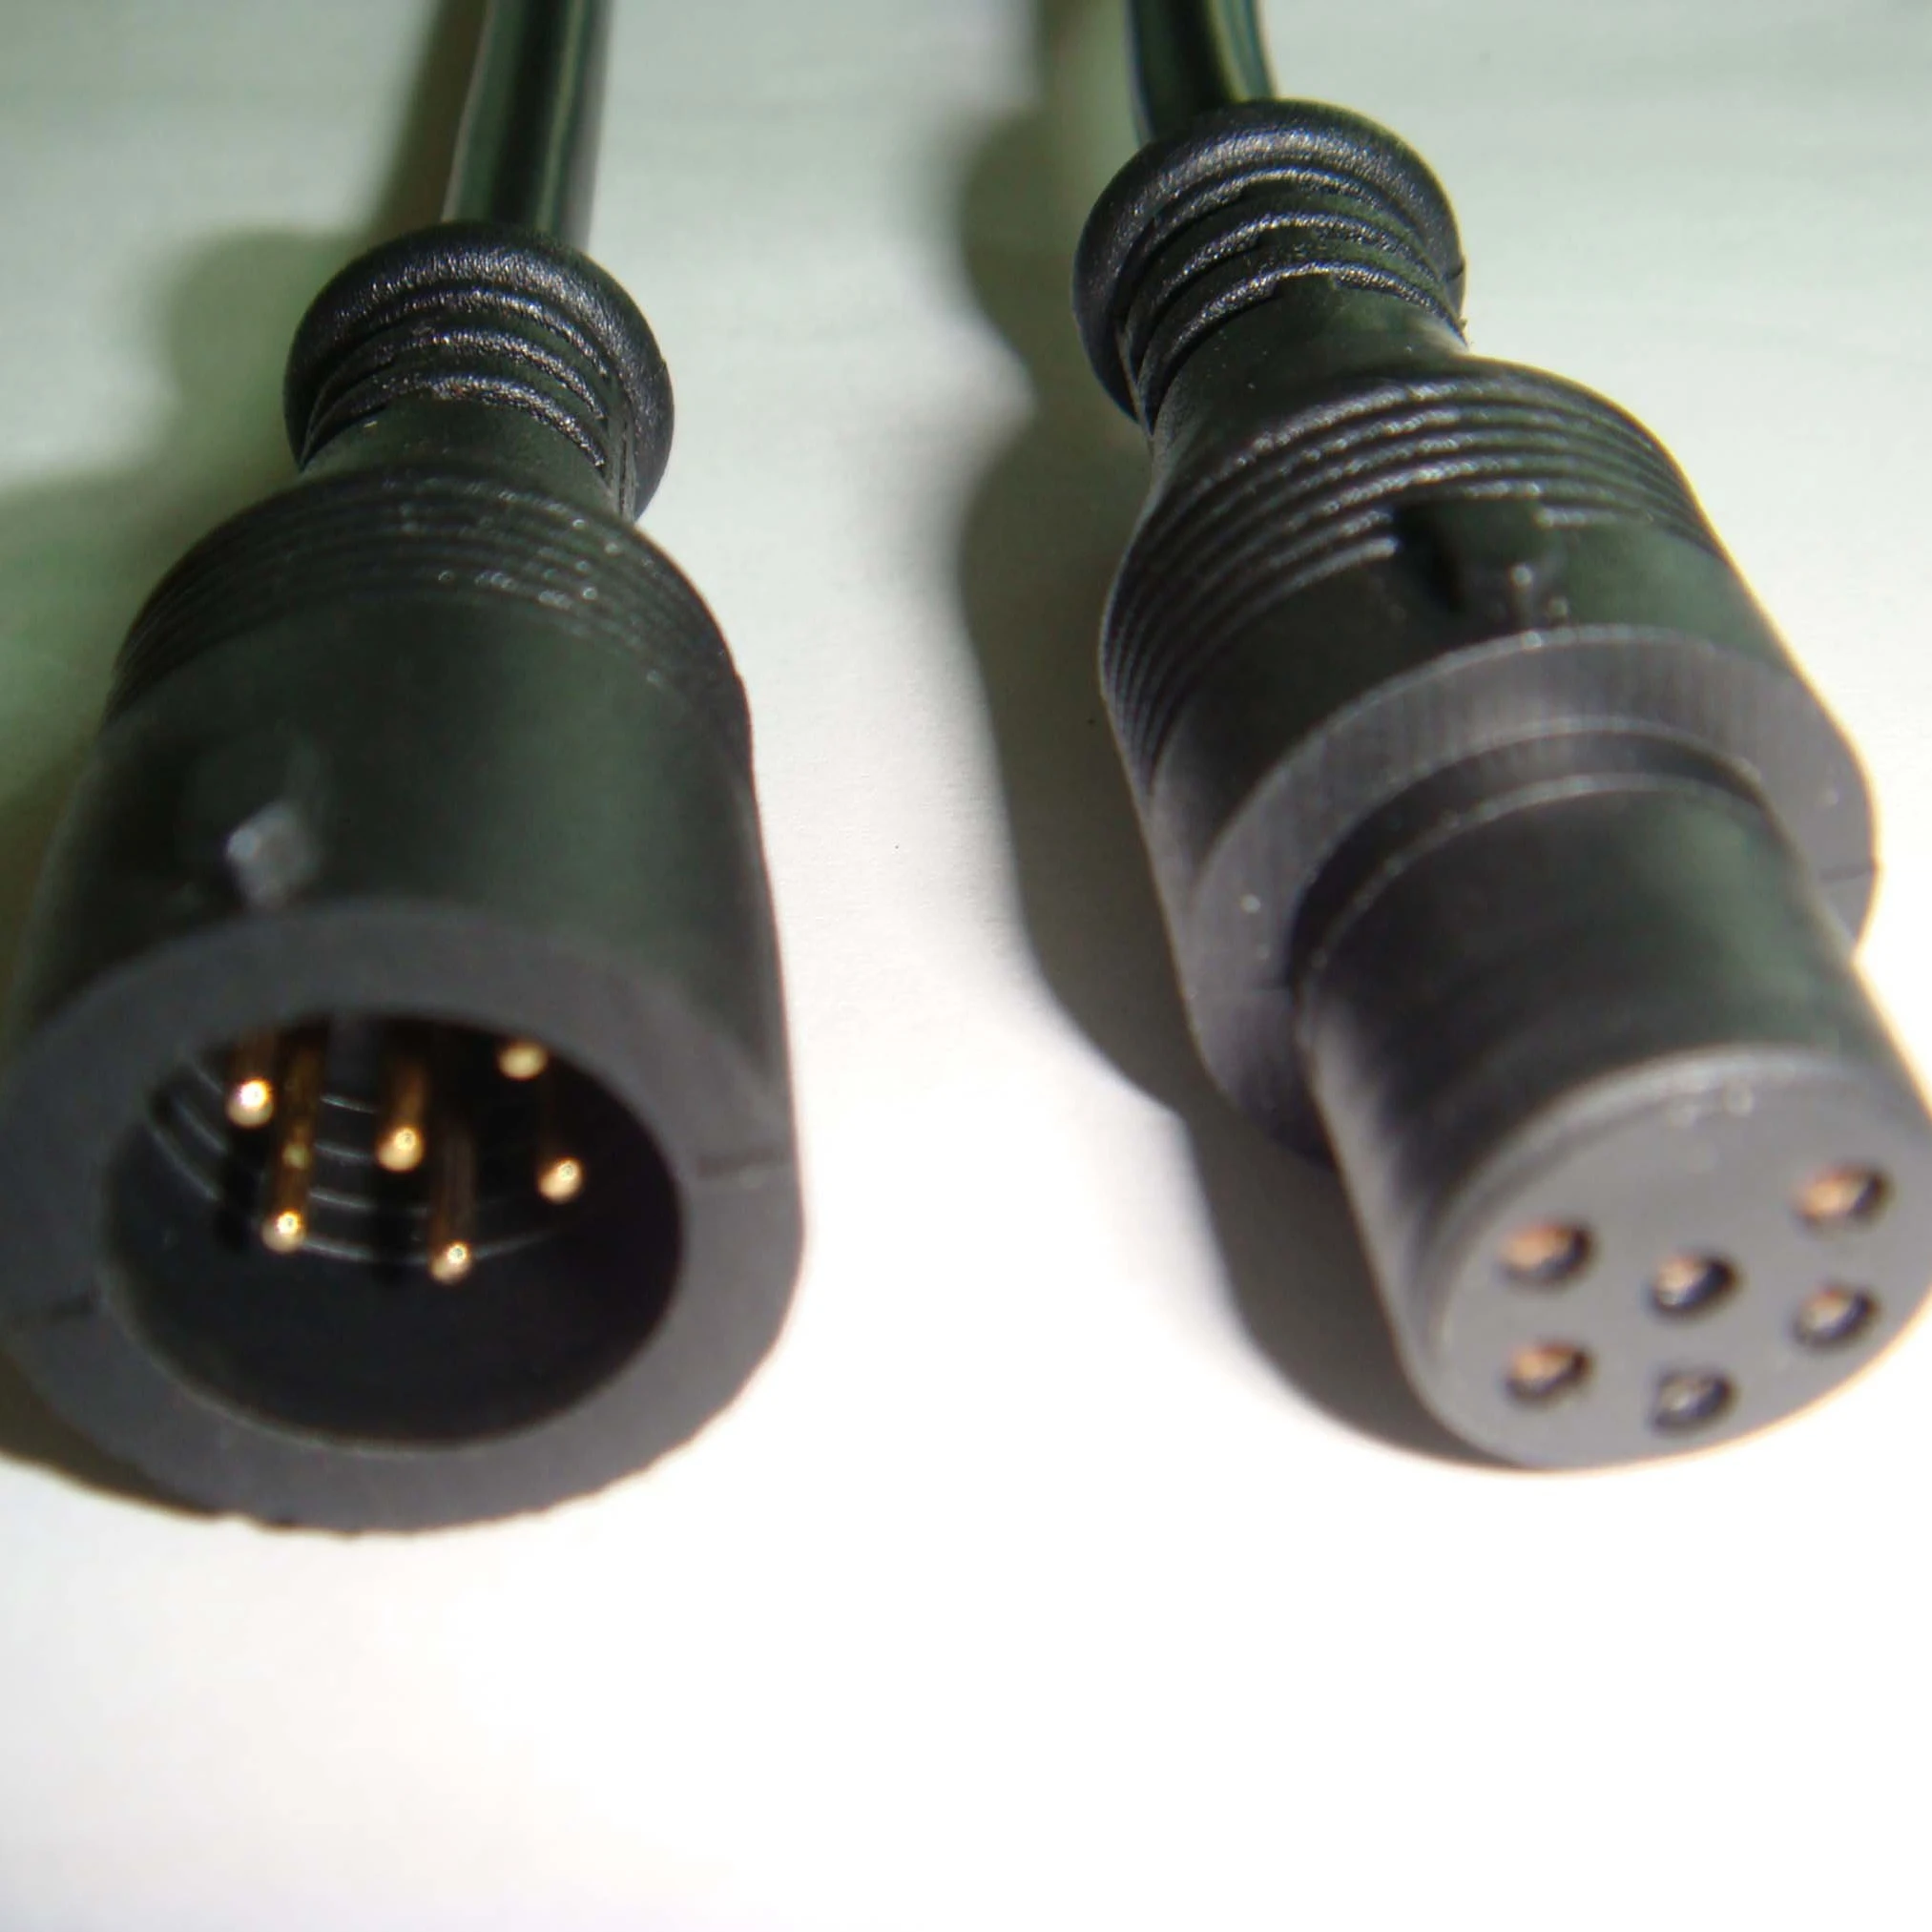 Waterproof electrical connectors with 6 pin